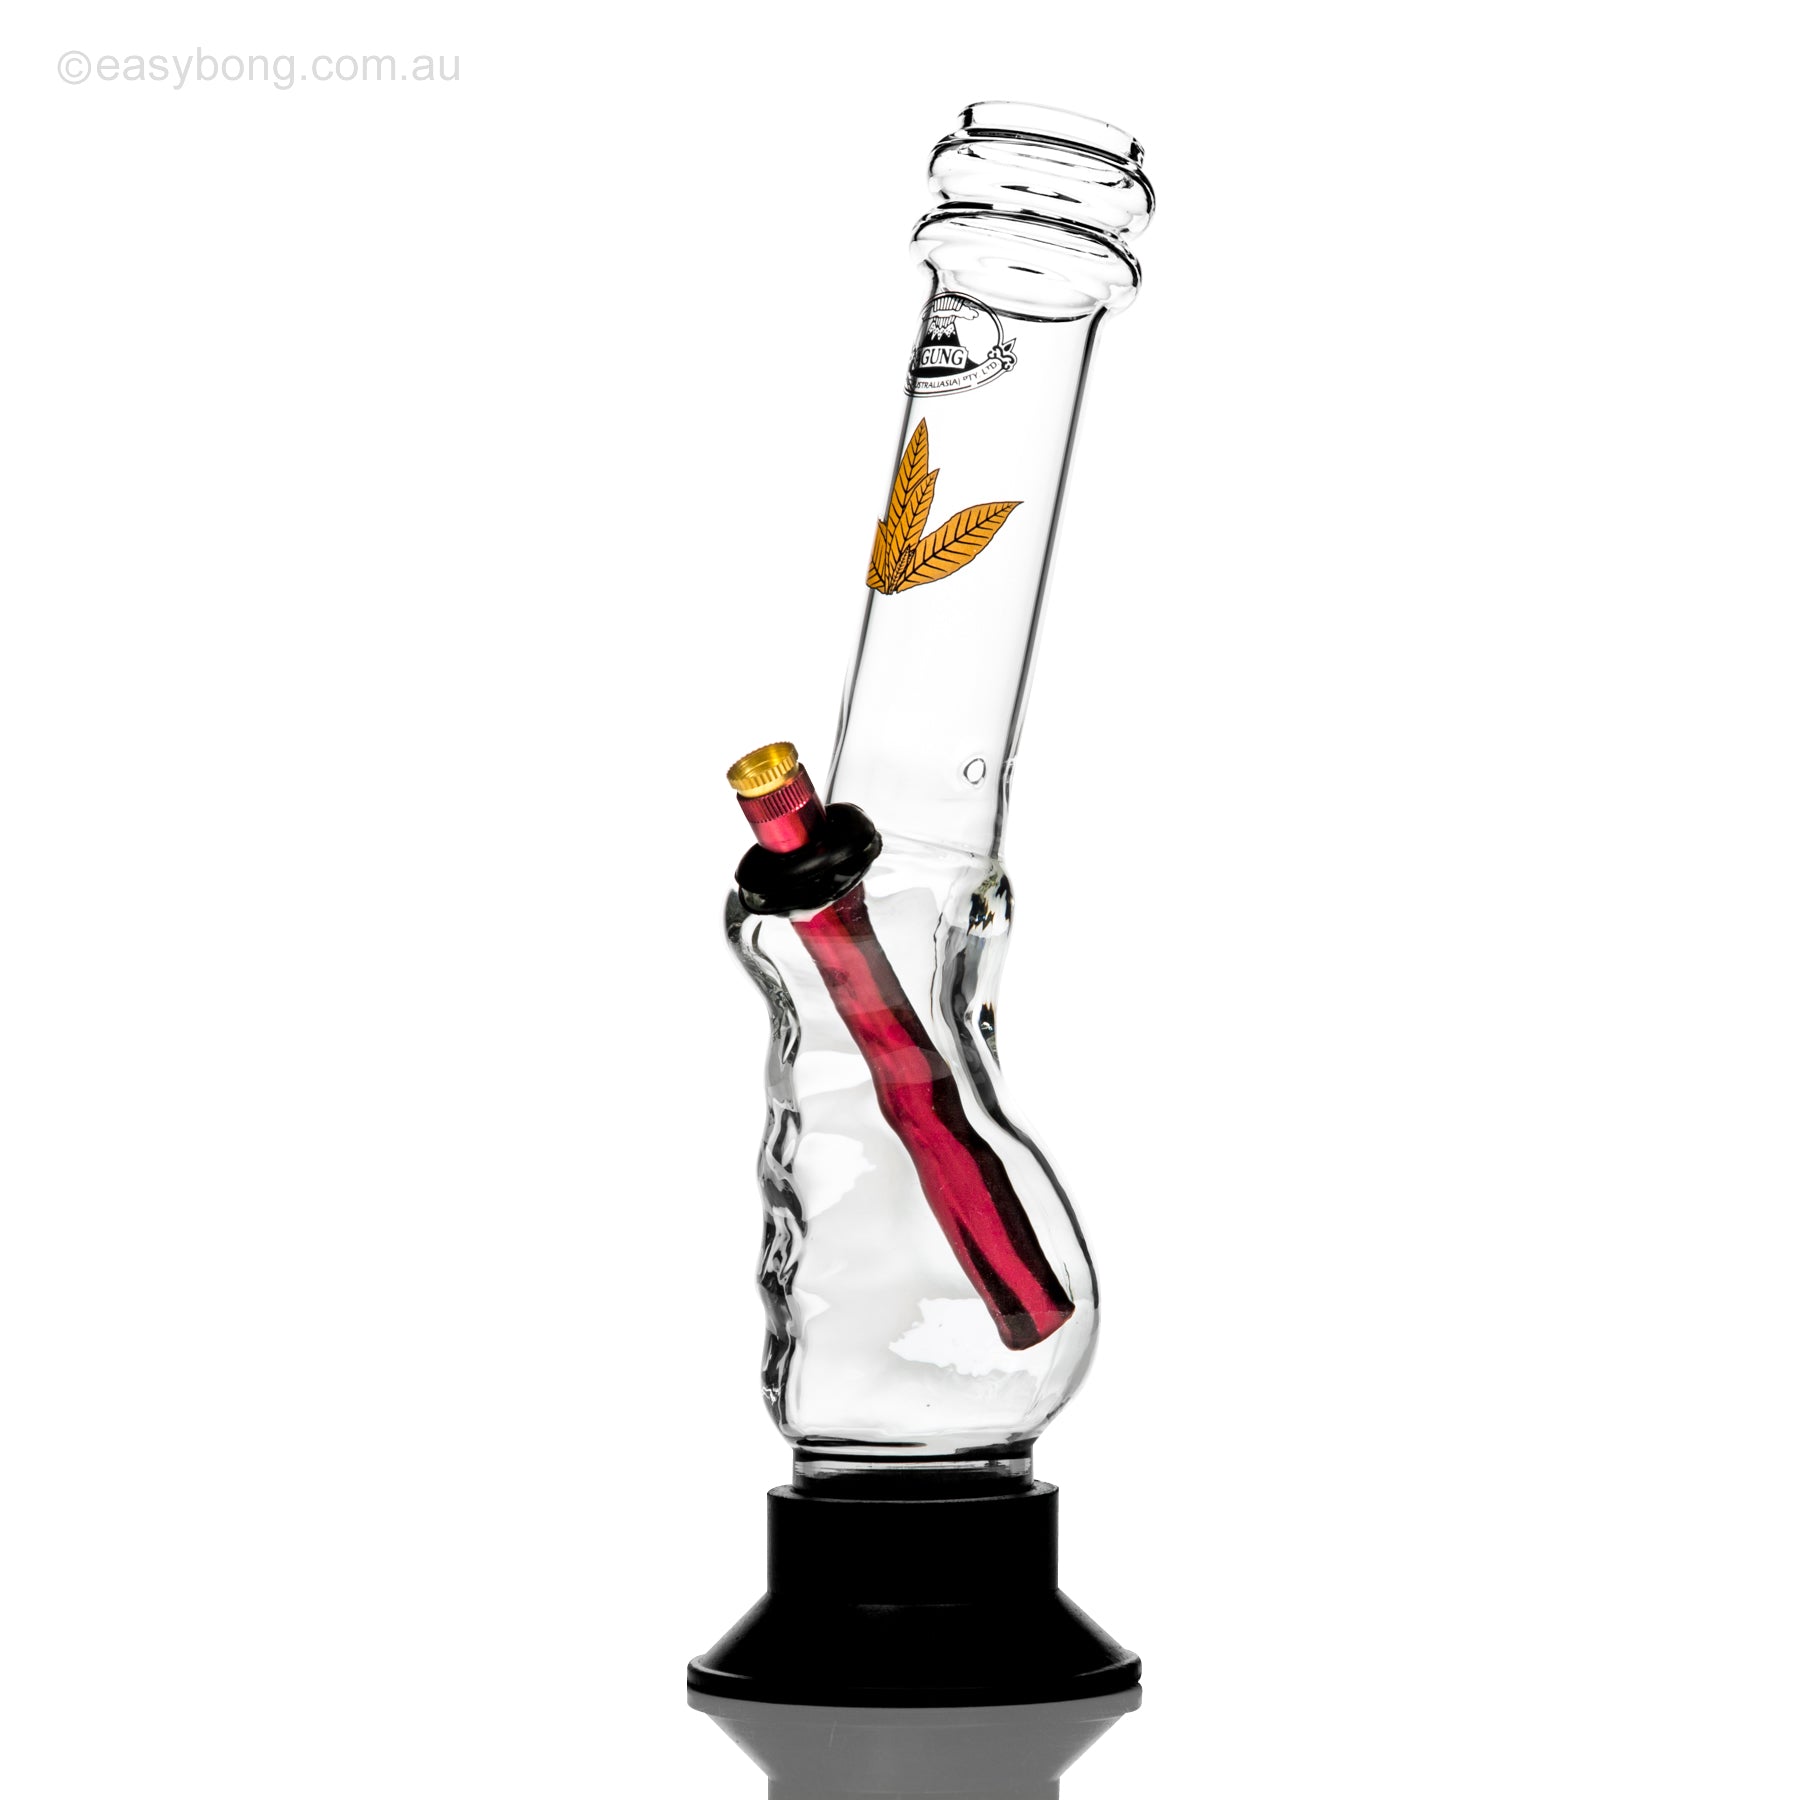 Agung Gripper pyrex glass bong with cannabis leaf decal on the neck.